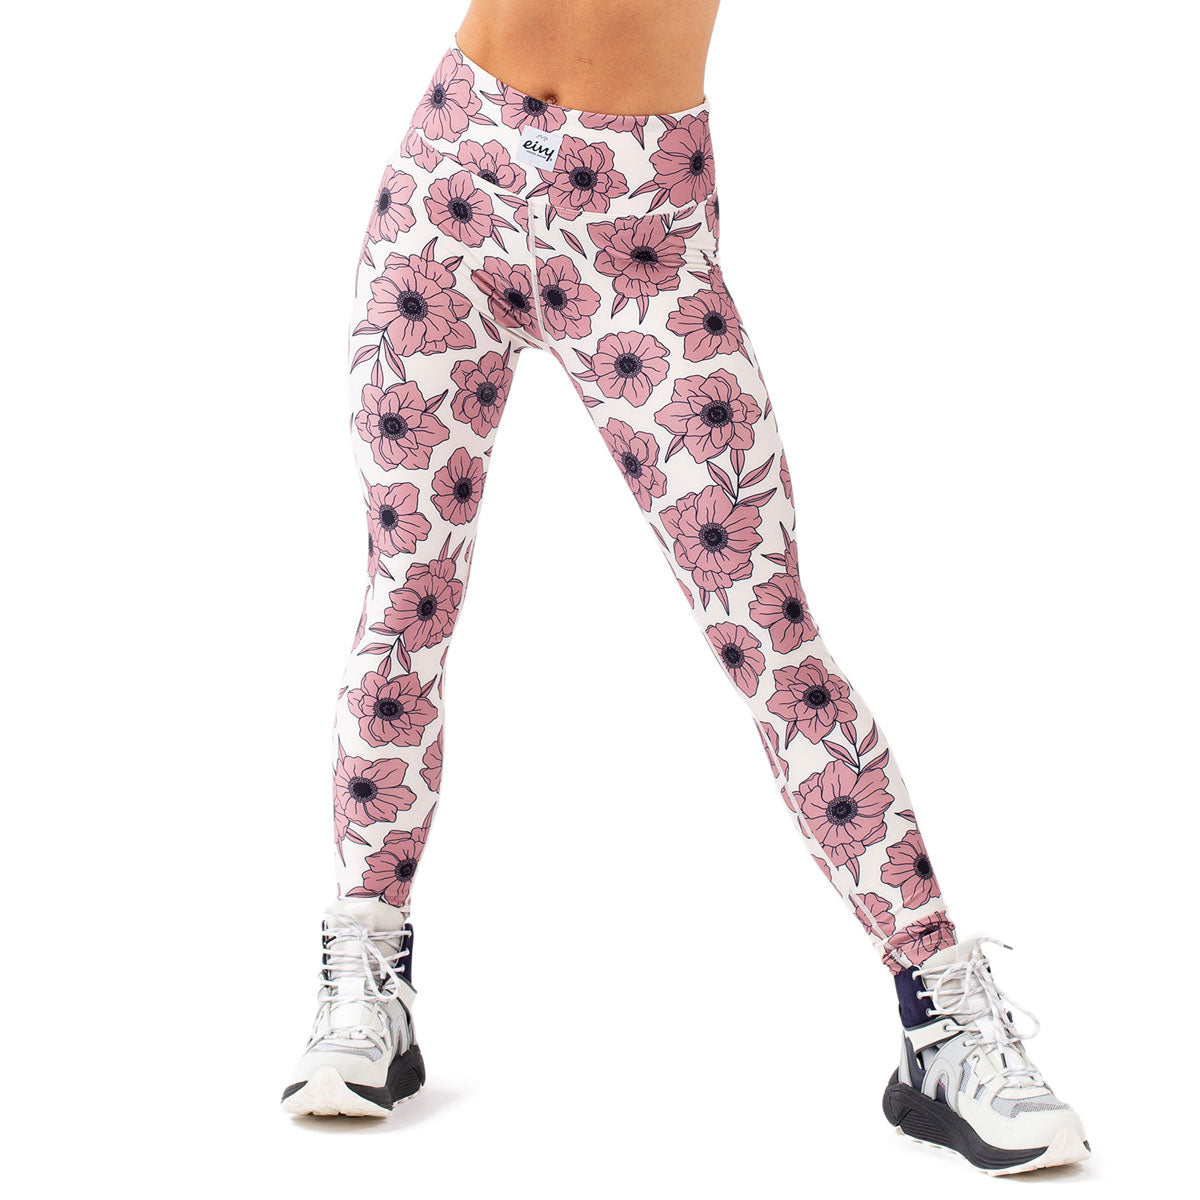 Eivy Icecold Tights Snowboard Base Layer - Wall Flowers image 1